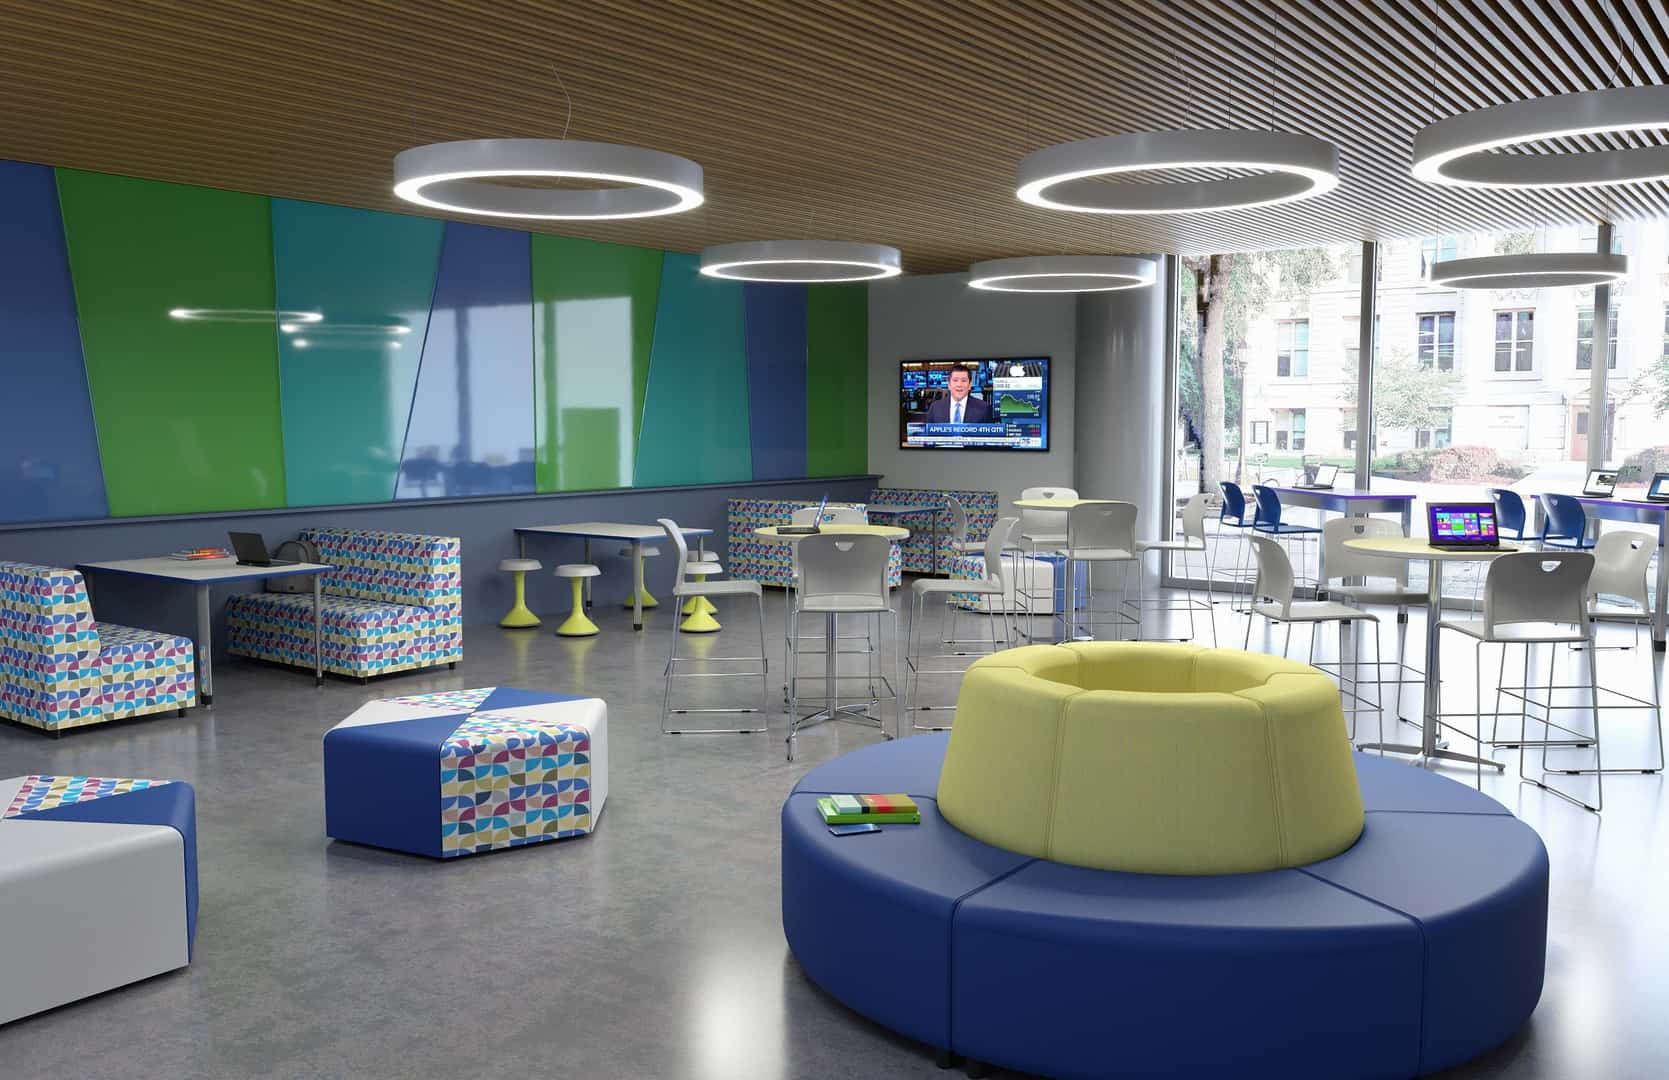 Designing Flexible, Multiuse Learning Spaces: Five Keys to Success